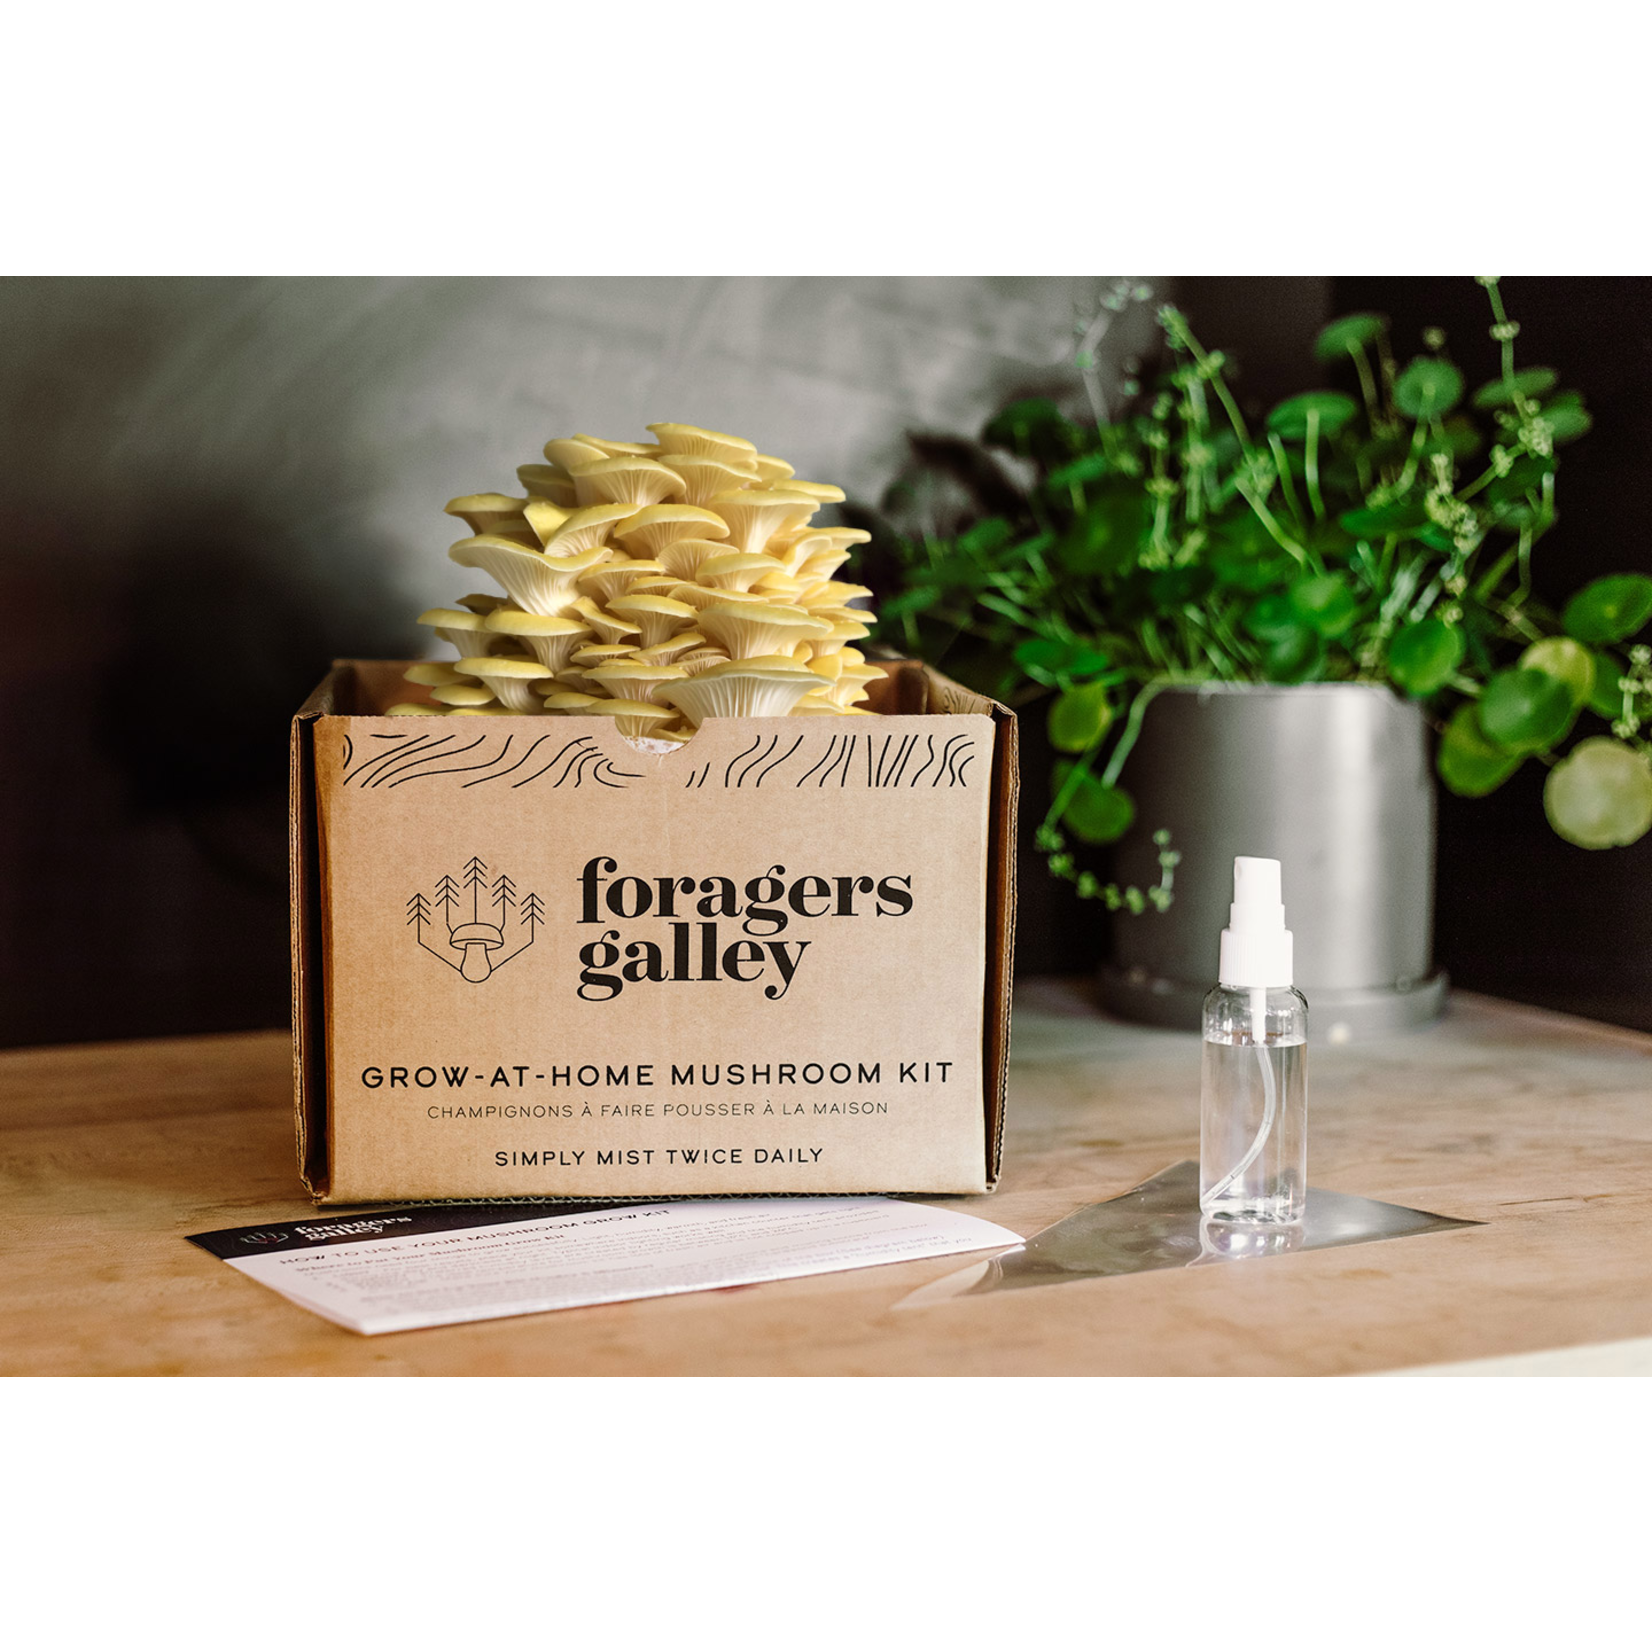 Foragers Galley Golden Oyster Mushroom Kit